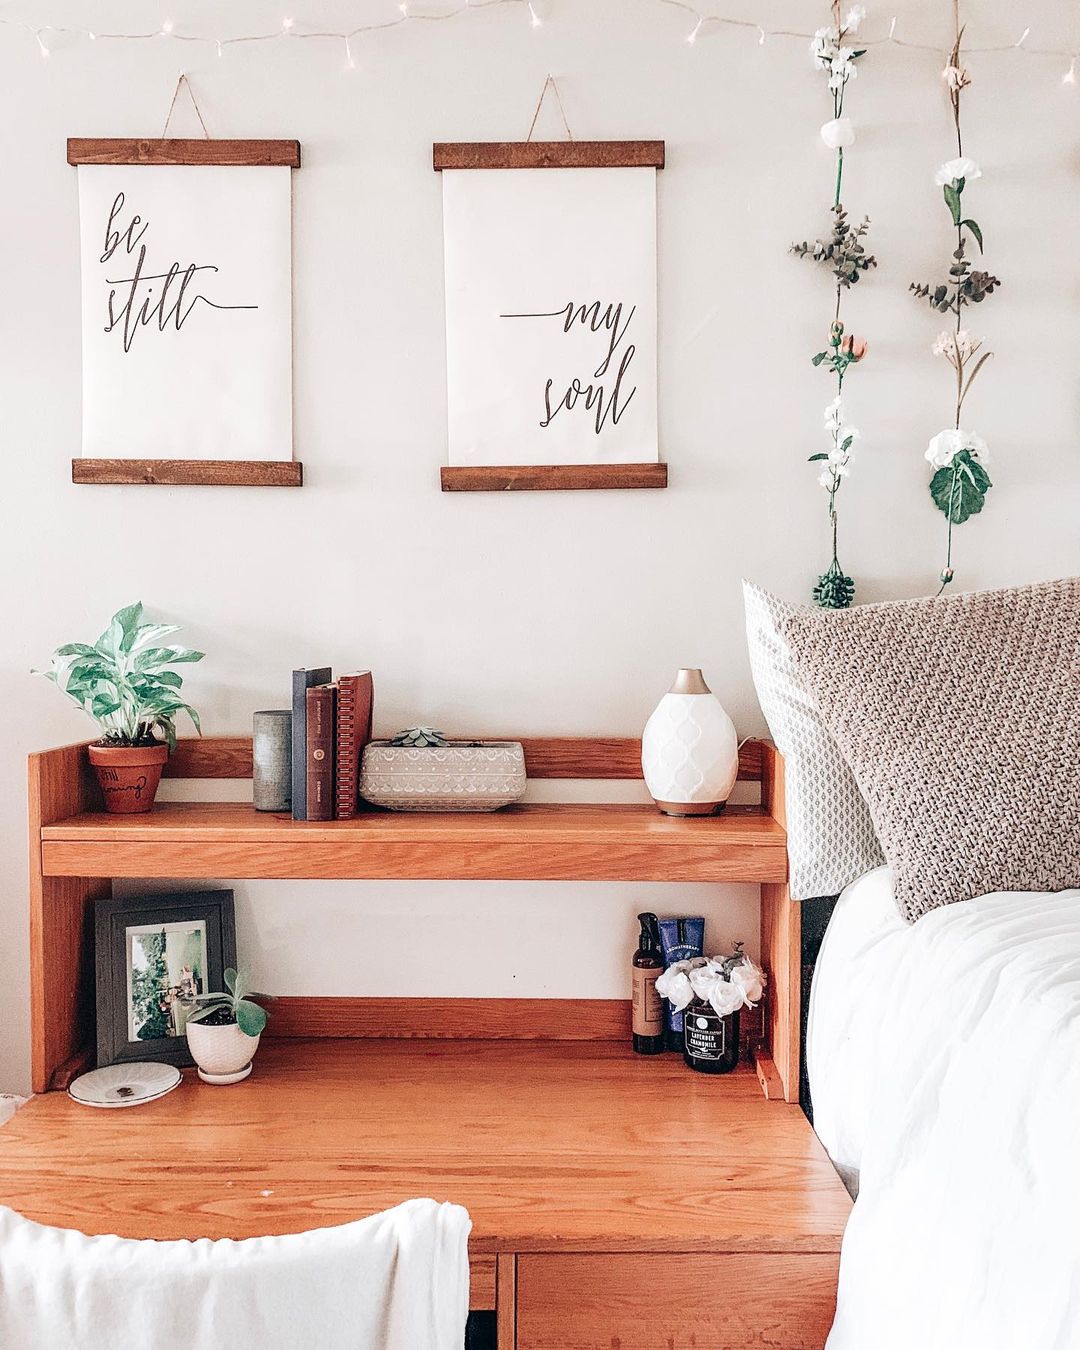 Small Dorm Space with a Hutch Desk. Photo by Instagram user @alysse.armstrong